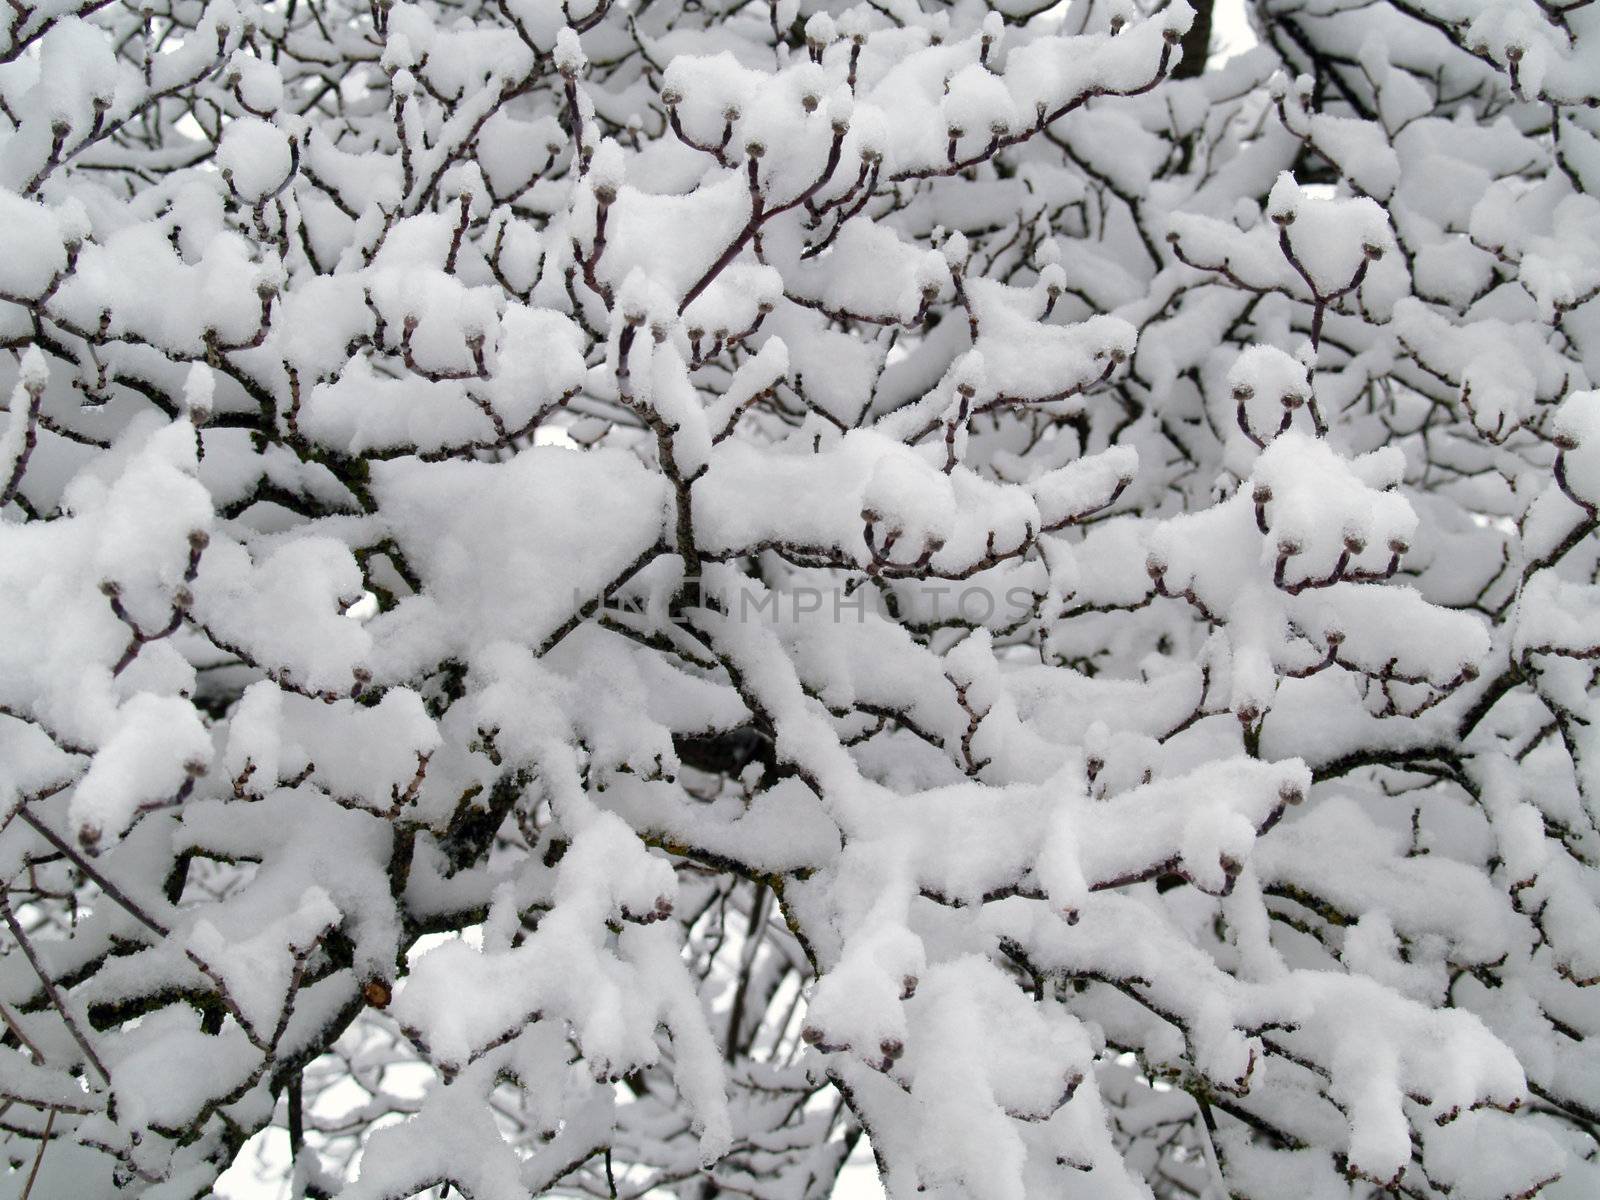 Snow Covered Branches on a Tree After a Snowfall by Frankljunior